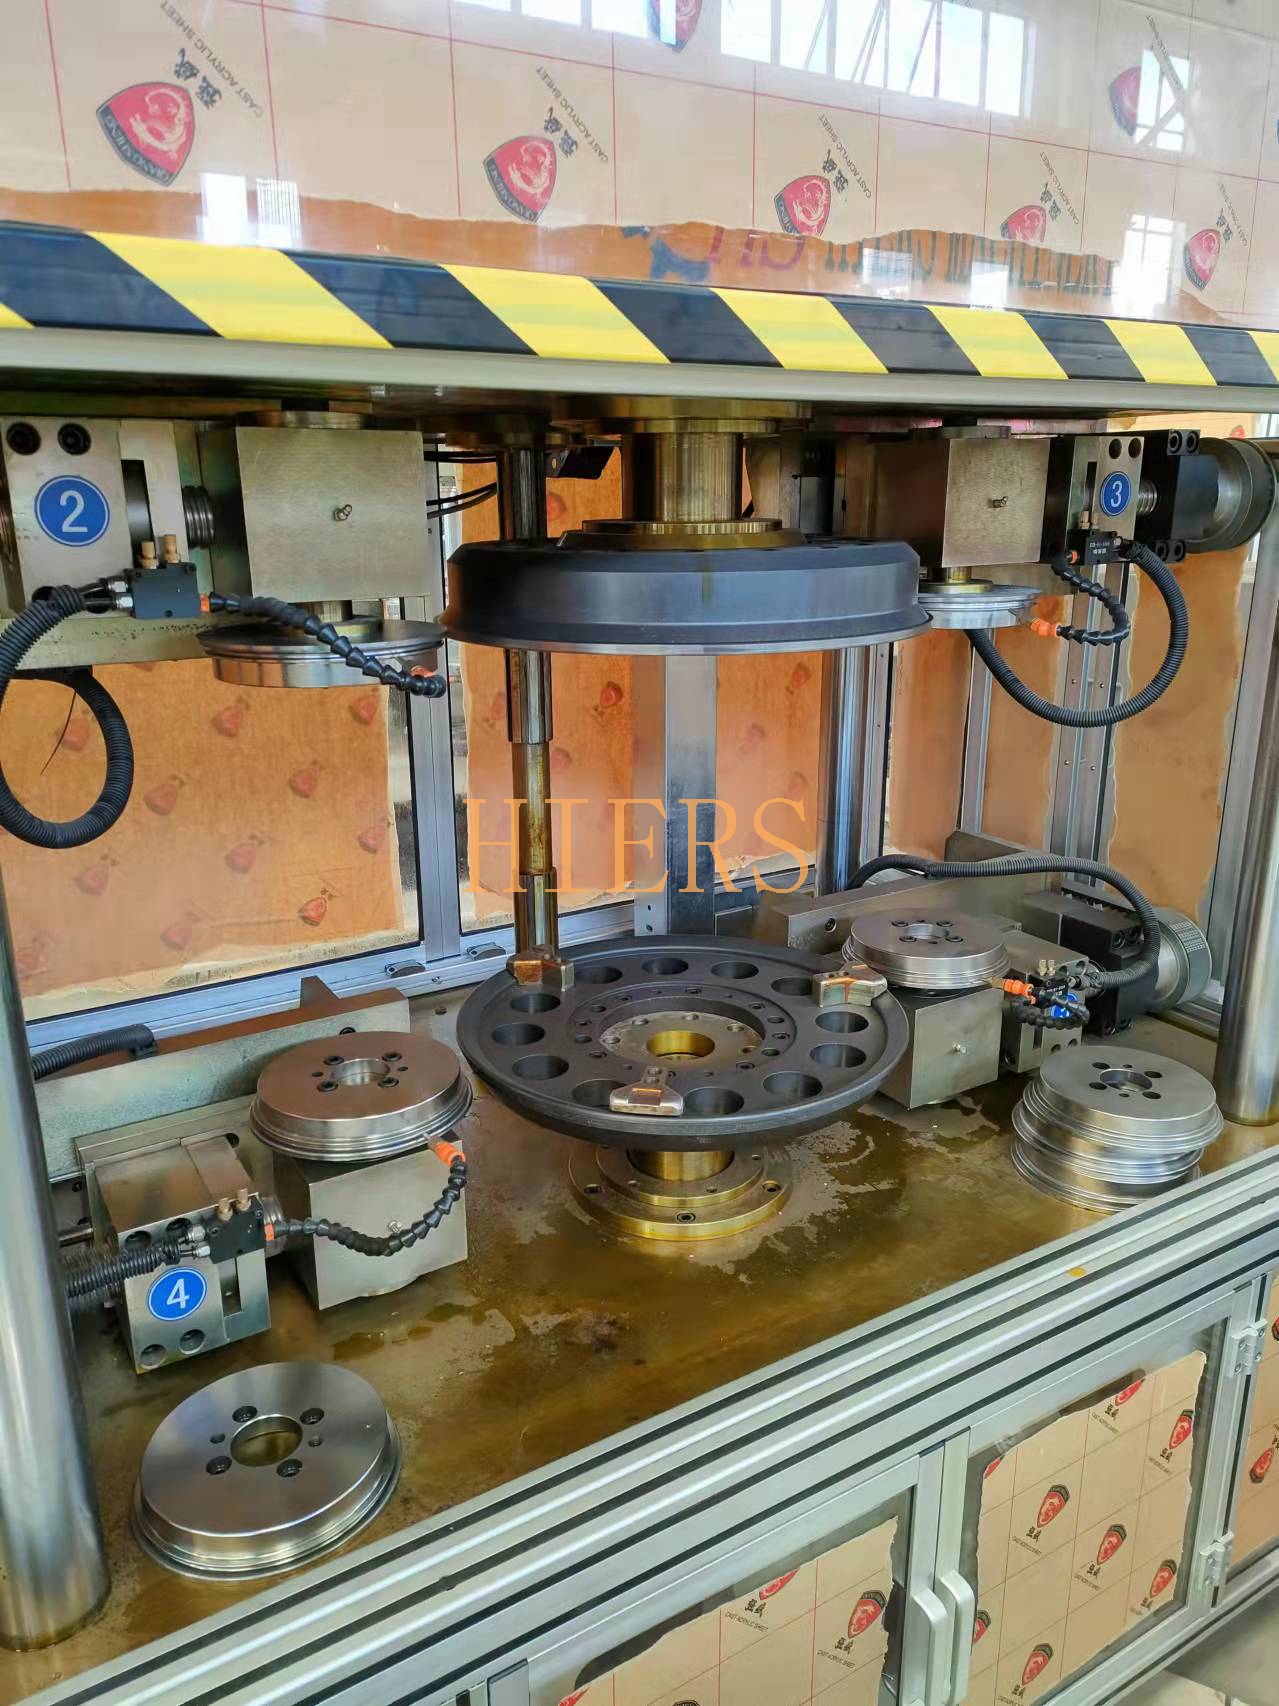 The front and rear flange circle riveting machine